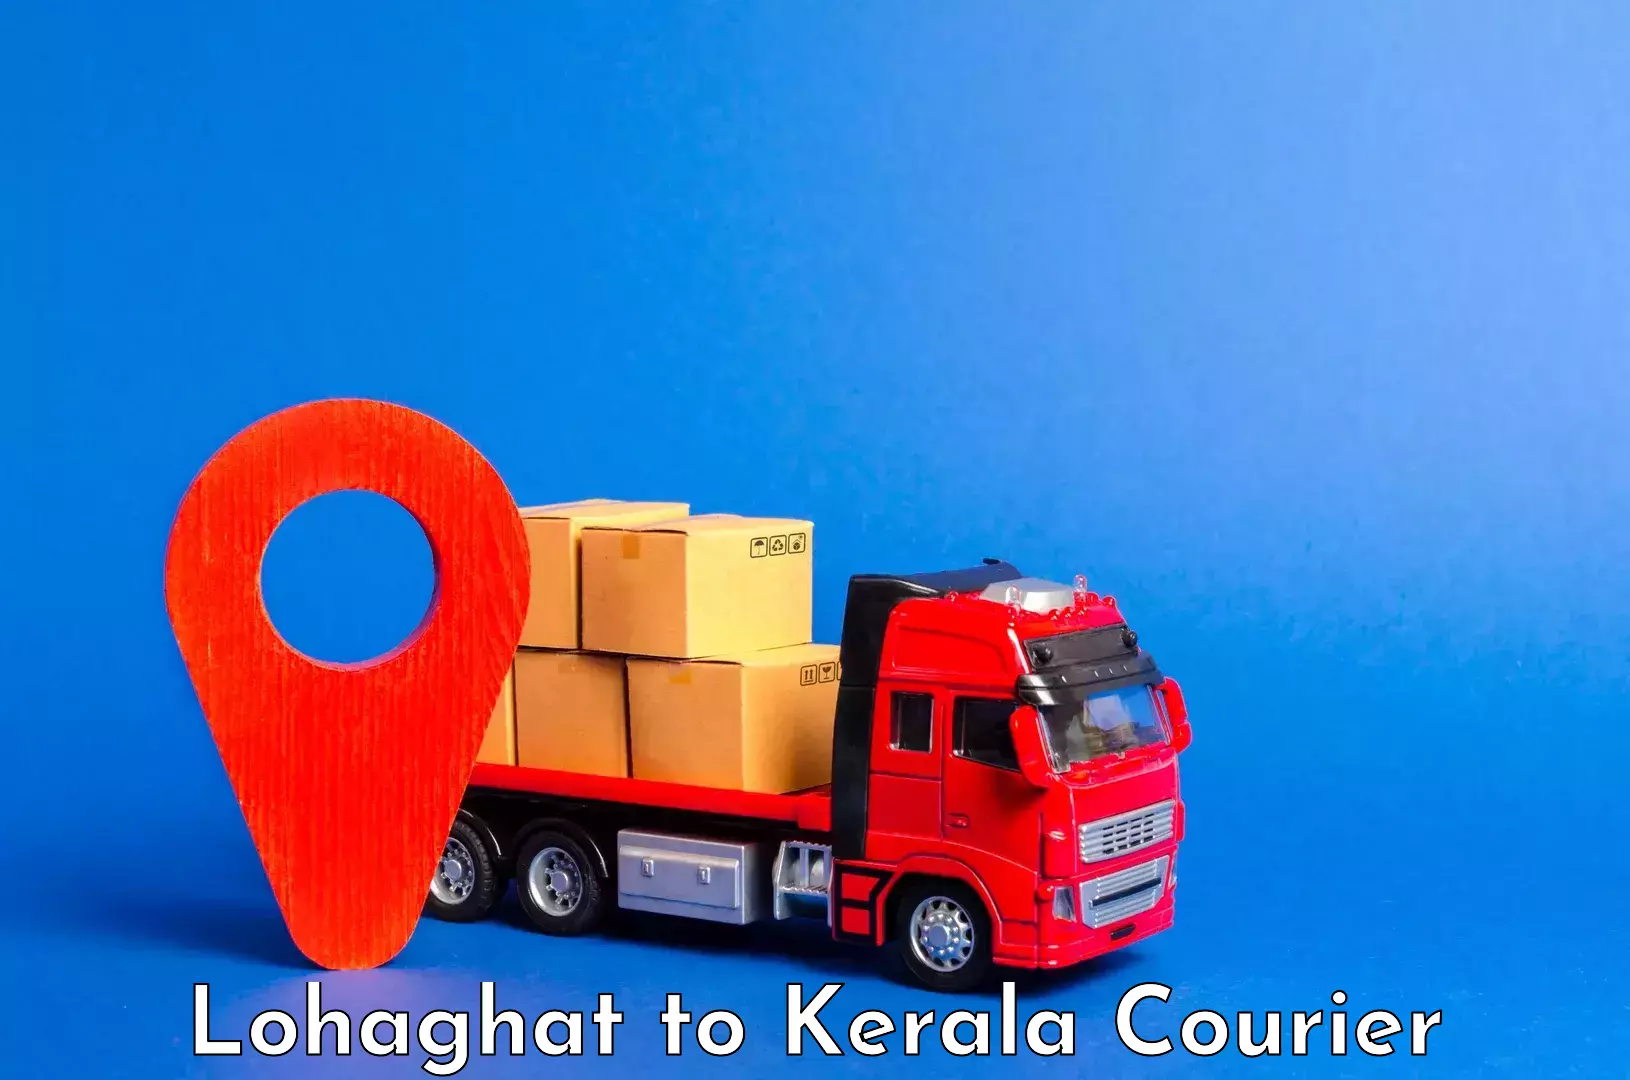 Luggage transport service Lohaghat to Munnar